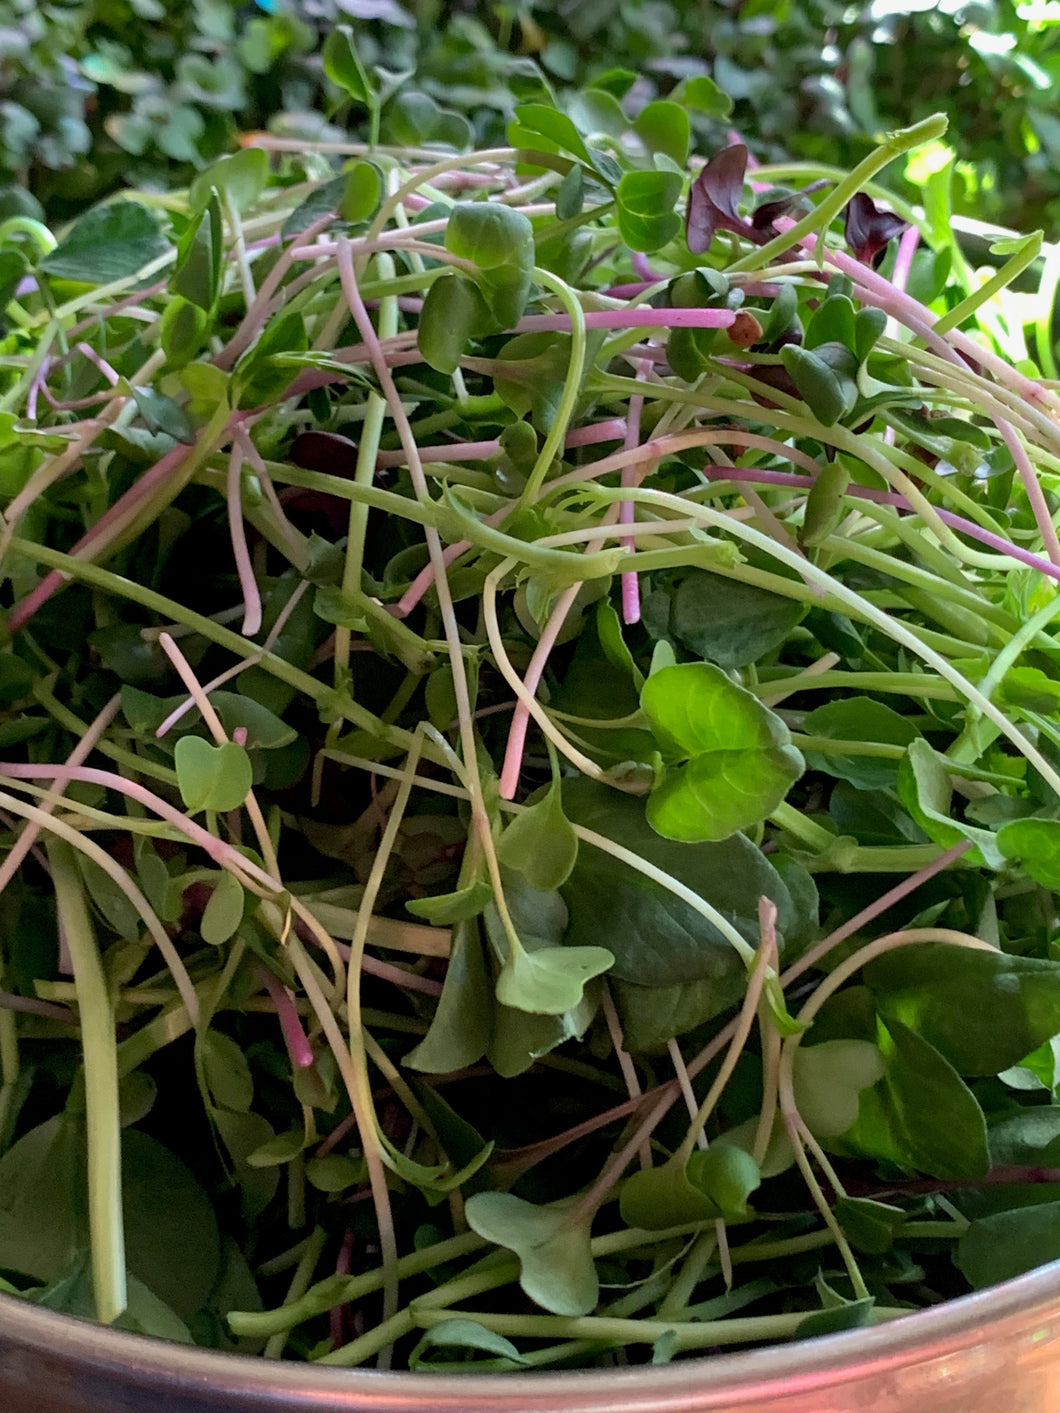 Option B - Free Climb CSA Membership - Stress Buster Microgreen Salad Mix - 3 oz container - You can add this item to any CSA membership or order it alone - The Mountain Fountain, Longmont Co - Pick-Up Spot <br> This is our most popular item!